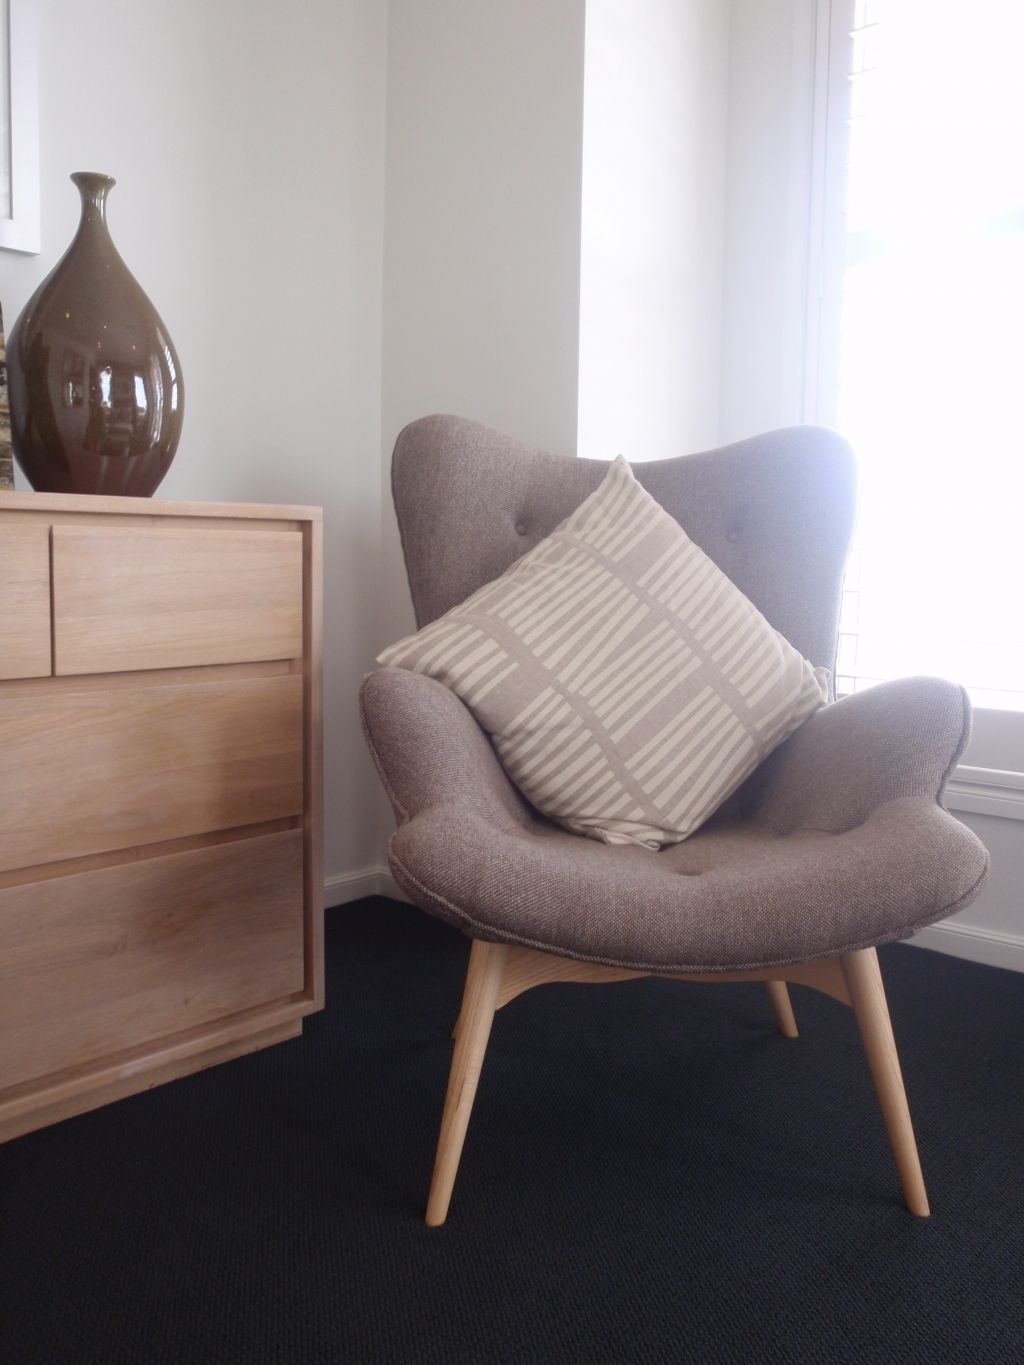 Good Comfy Chairs For Small Spaces Homesfeed With Regard To Compact Armchairs (View 14 of 15)